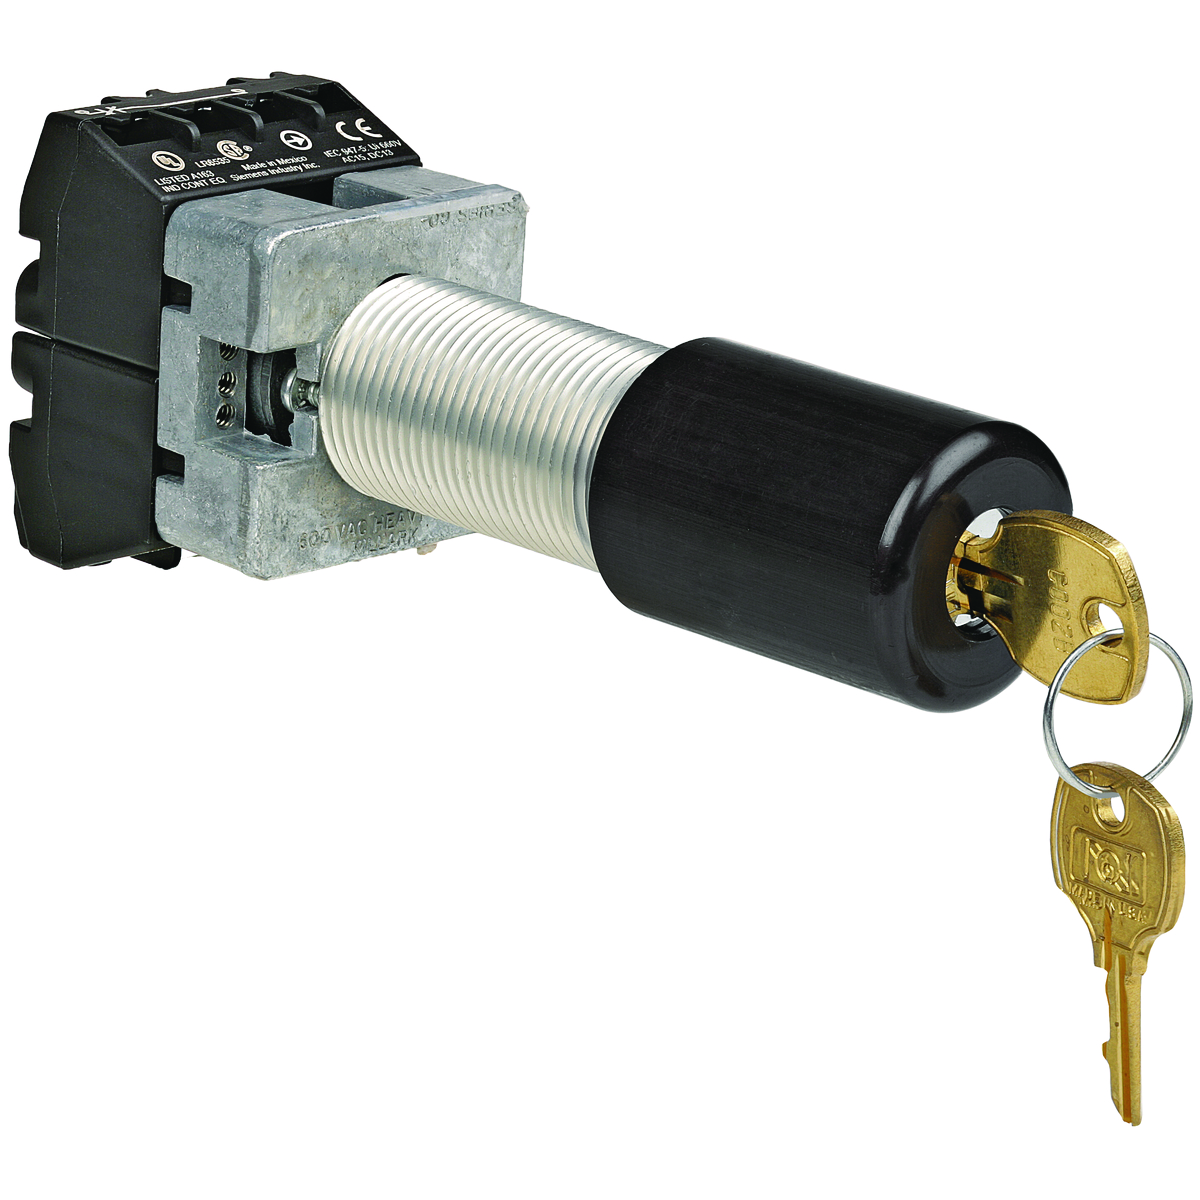 G SERIES - ALUMINUM EXTENDED SPRING RETURNED 2-POSITION KEYED SELECTORSWITCH OPERATOR - SPRING RETURN TO CENTER TO LEFT - KEYED DIFFERENT WITHKEY REMOVAL IN LEFT POSITION - 